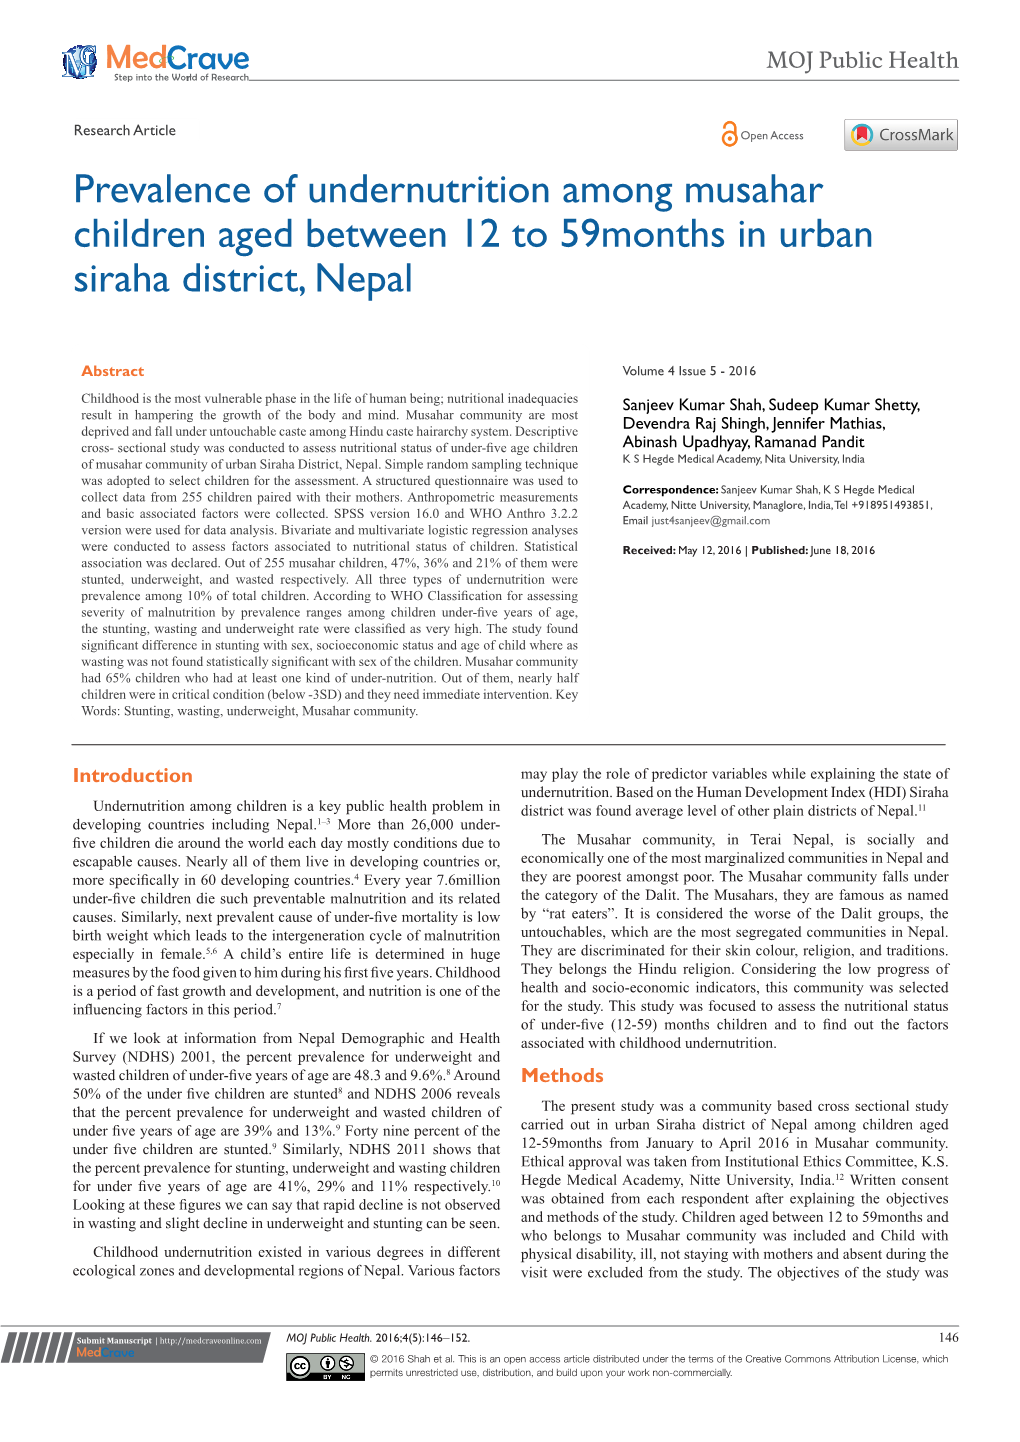 Prevalence of Undernutrition Among Musahar Children Aged Between 12 to 59Months in Urban Siraha District, Nepal